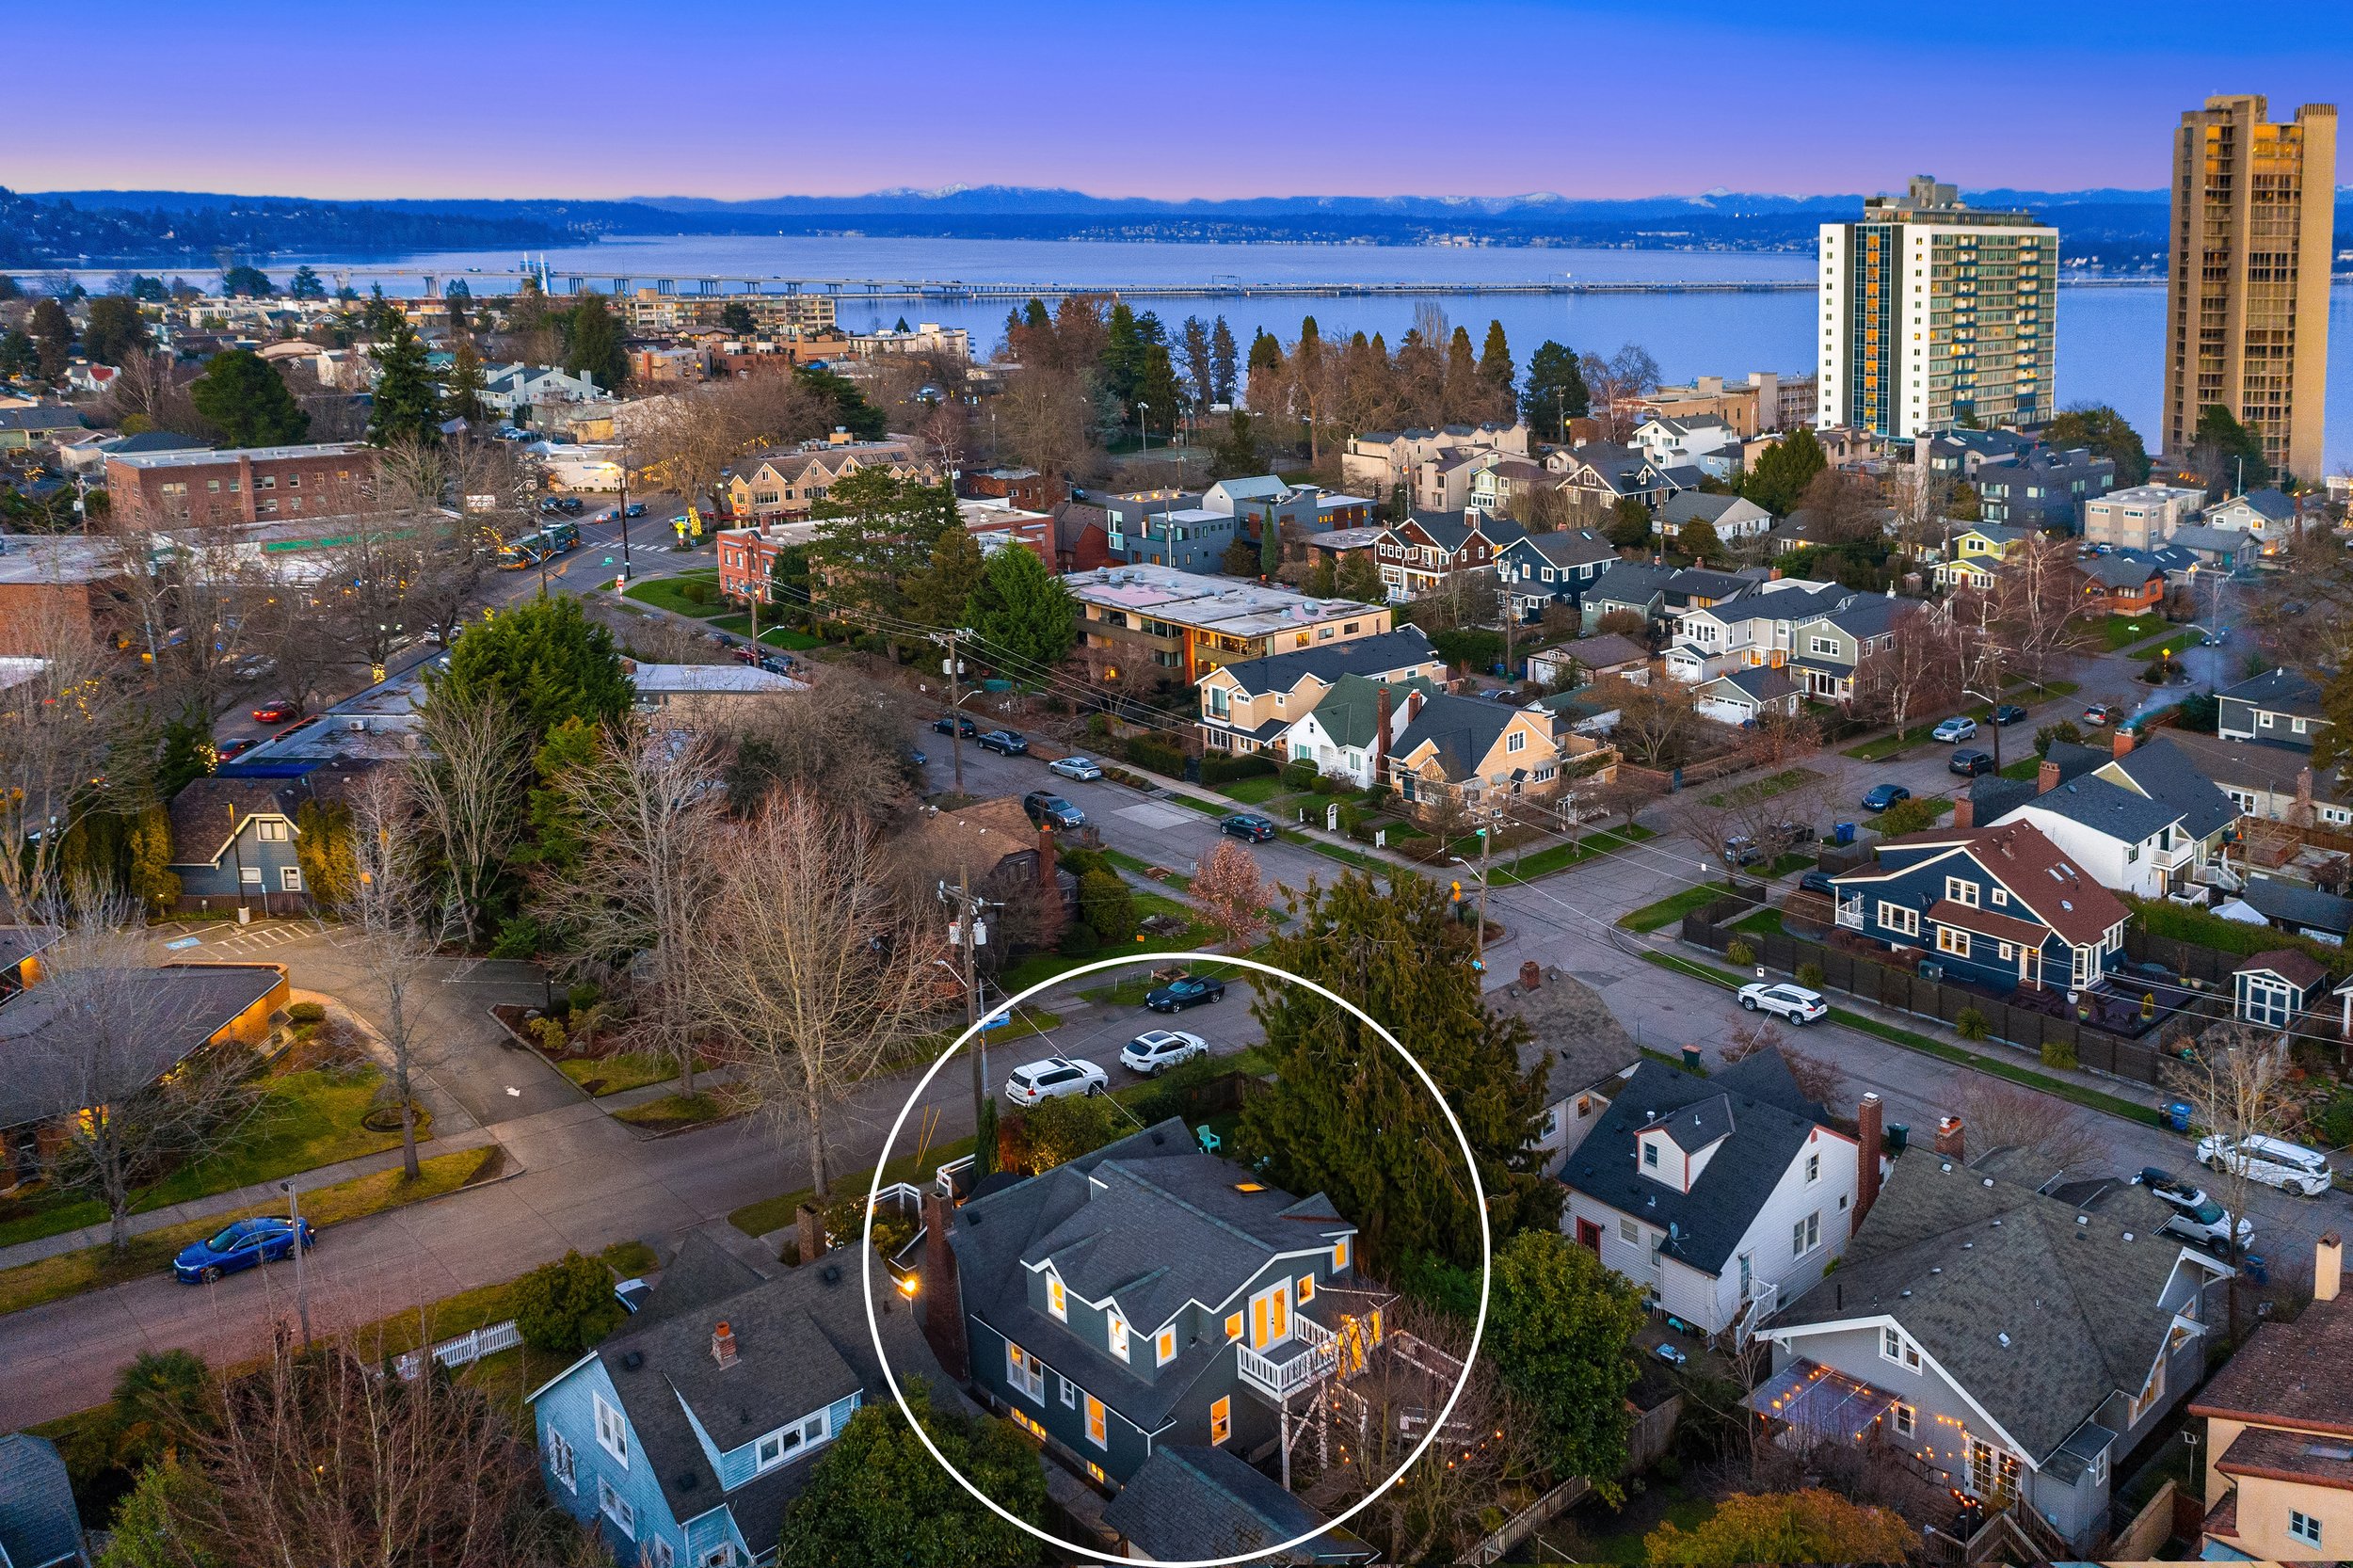  Beautifully appointed home offers an easy lifestyle among rich community surroundings. Stroll to Madison beach, neighborhood shops, coffee, diners, wine bars, Seattle Tennis Club + McGilvra Elementary. 